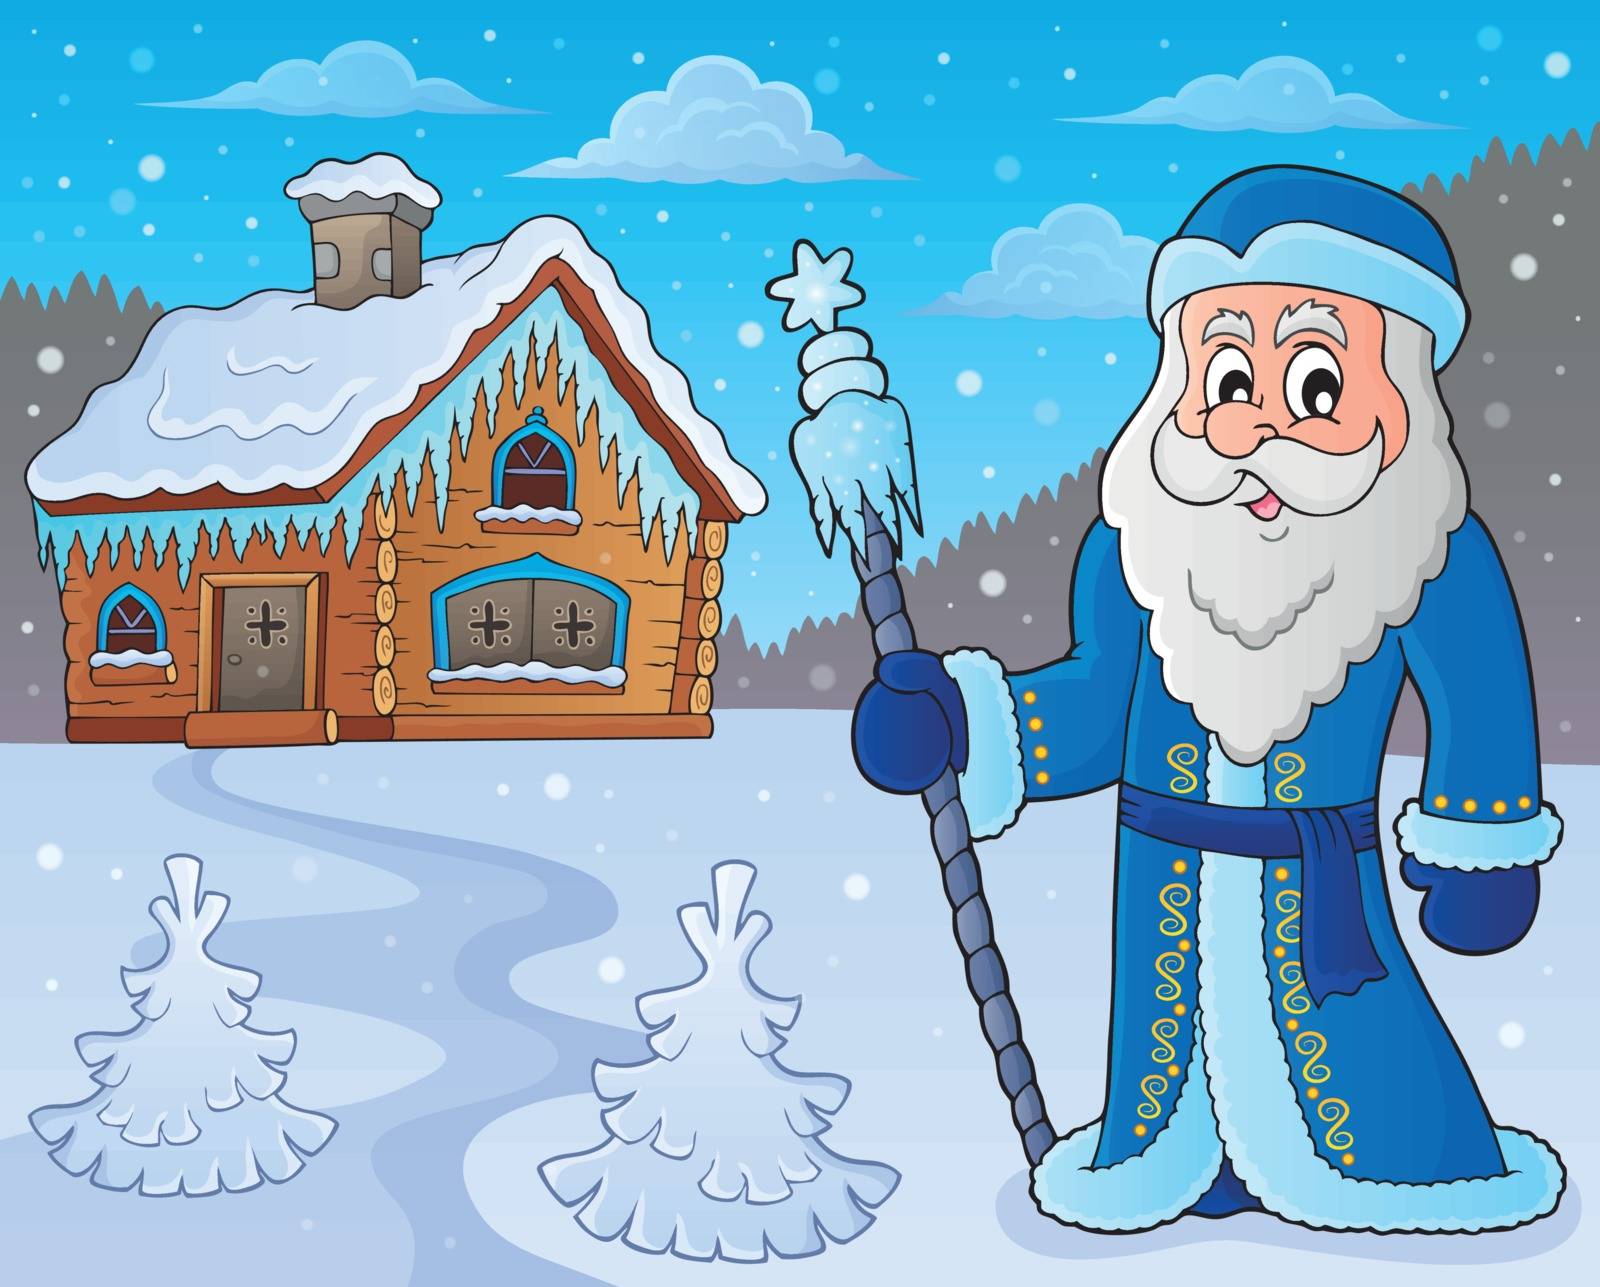 Father Frost theme image 7 - eps10 vector illustration.